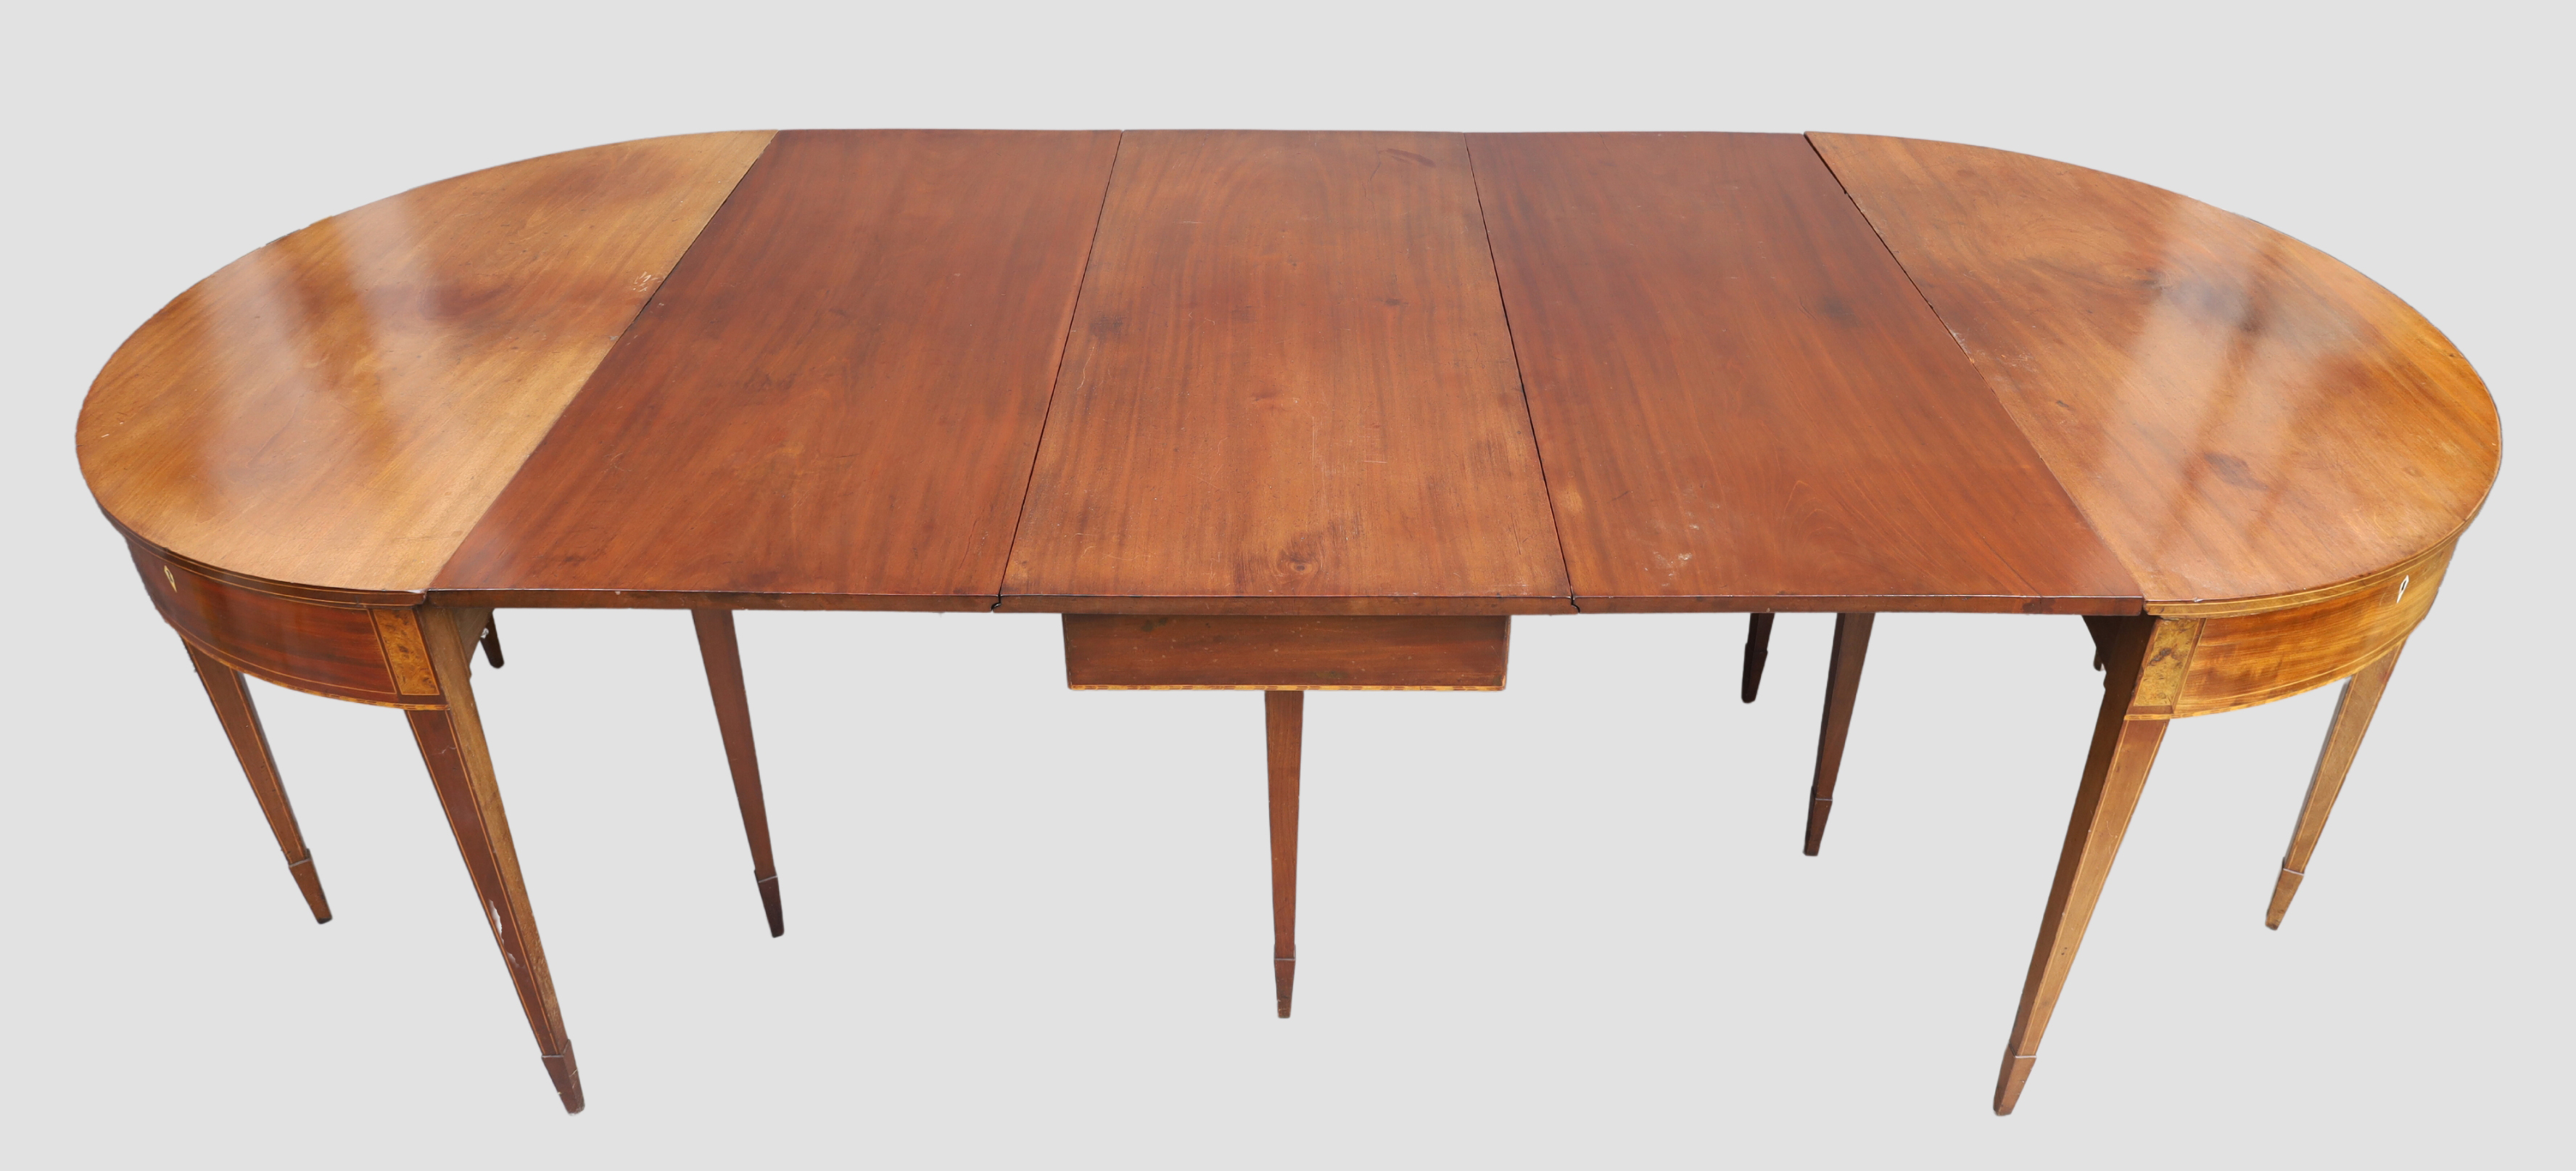 A George III mahogany D-end dining table, last quarter 18th century, boxwood and burr walnut inla... - Image 2 of 2